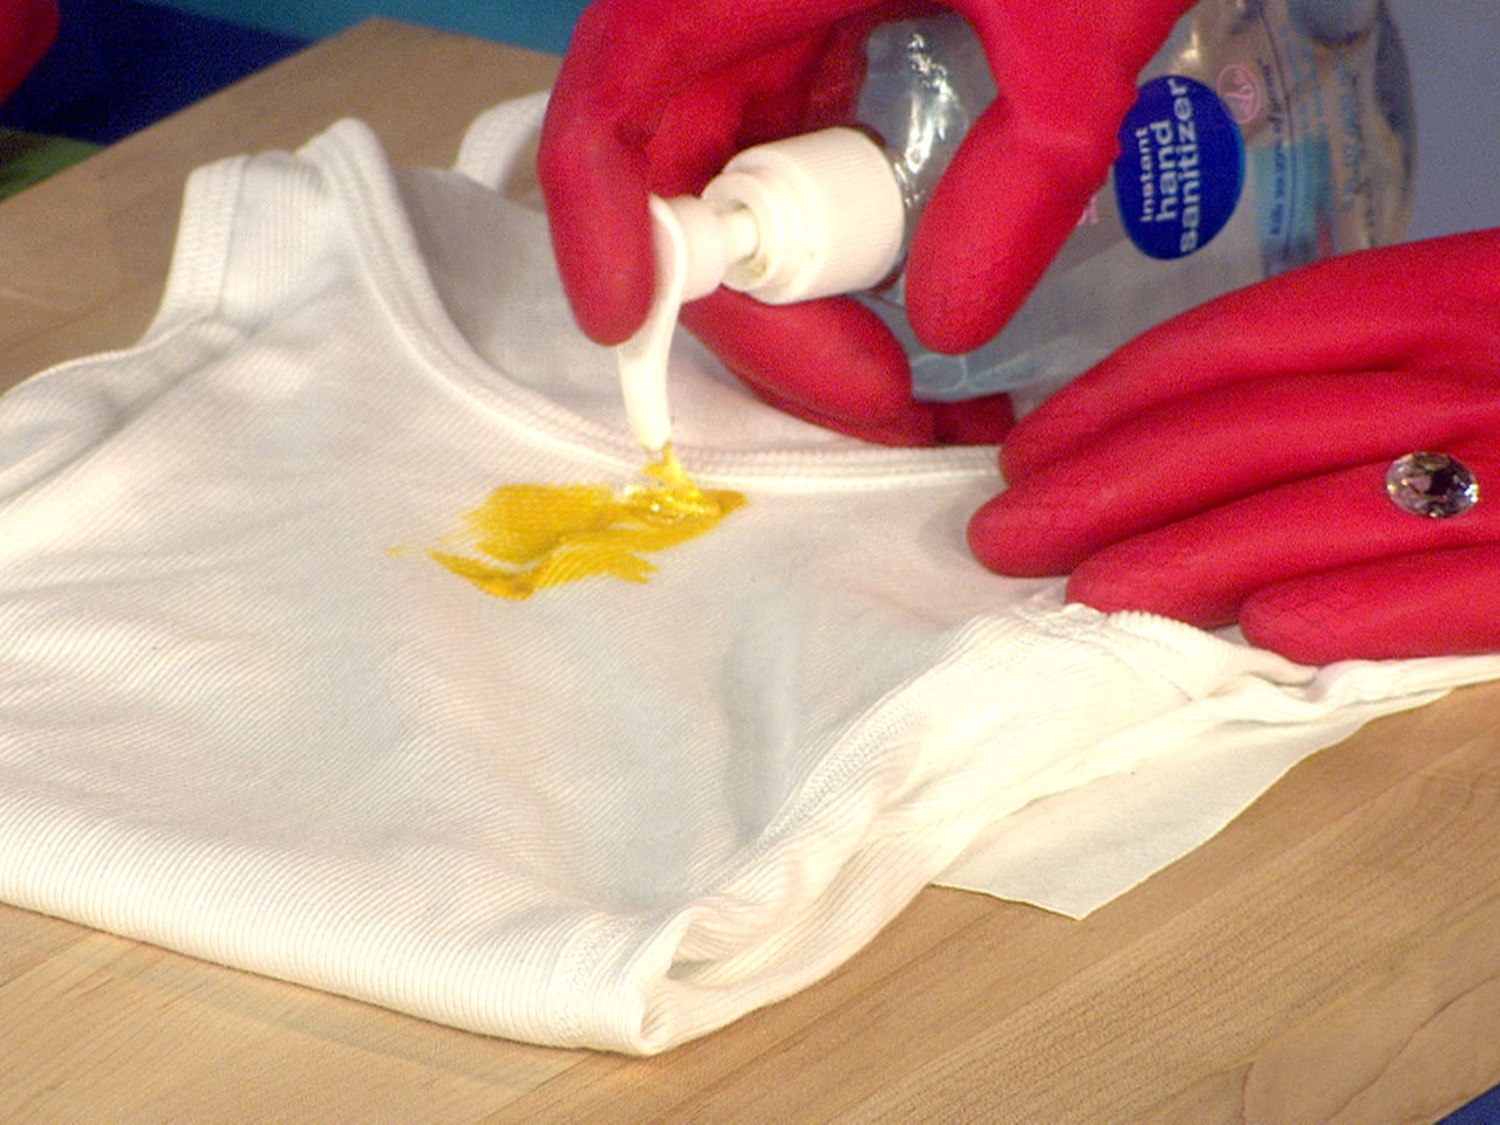 How to Clean Blood Stains